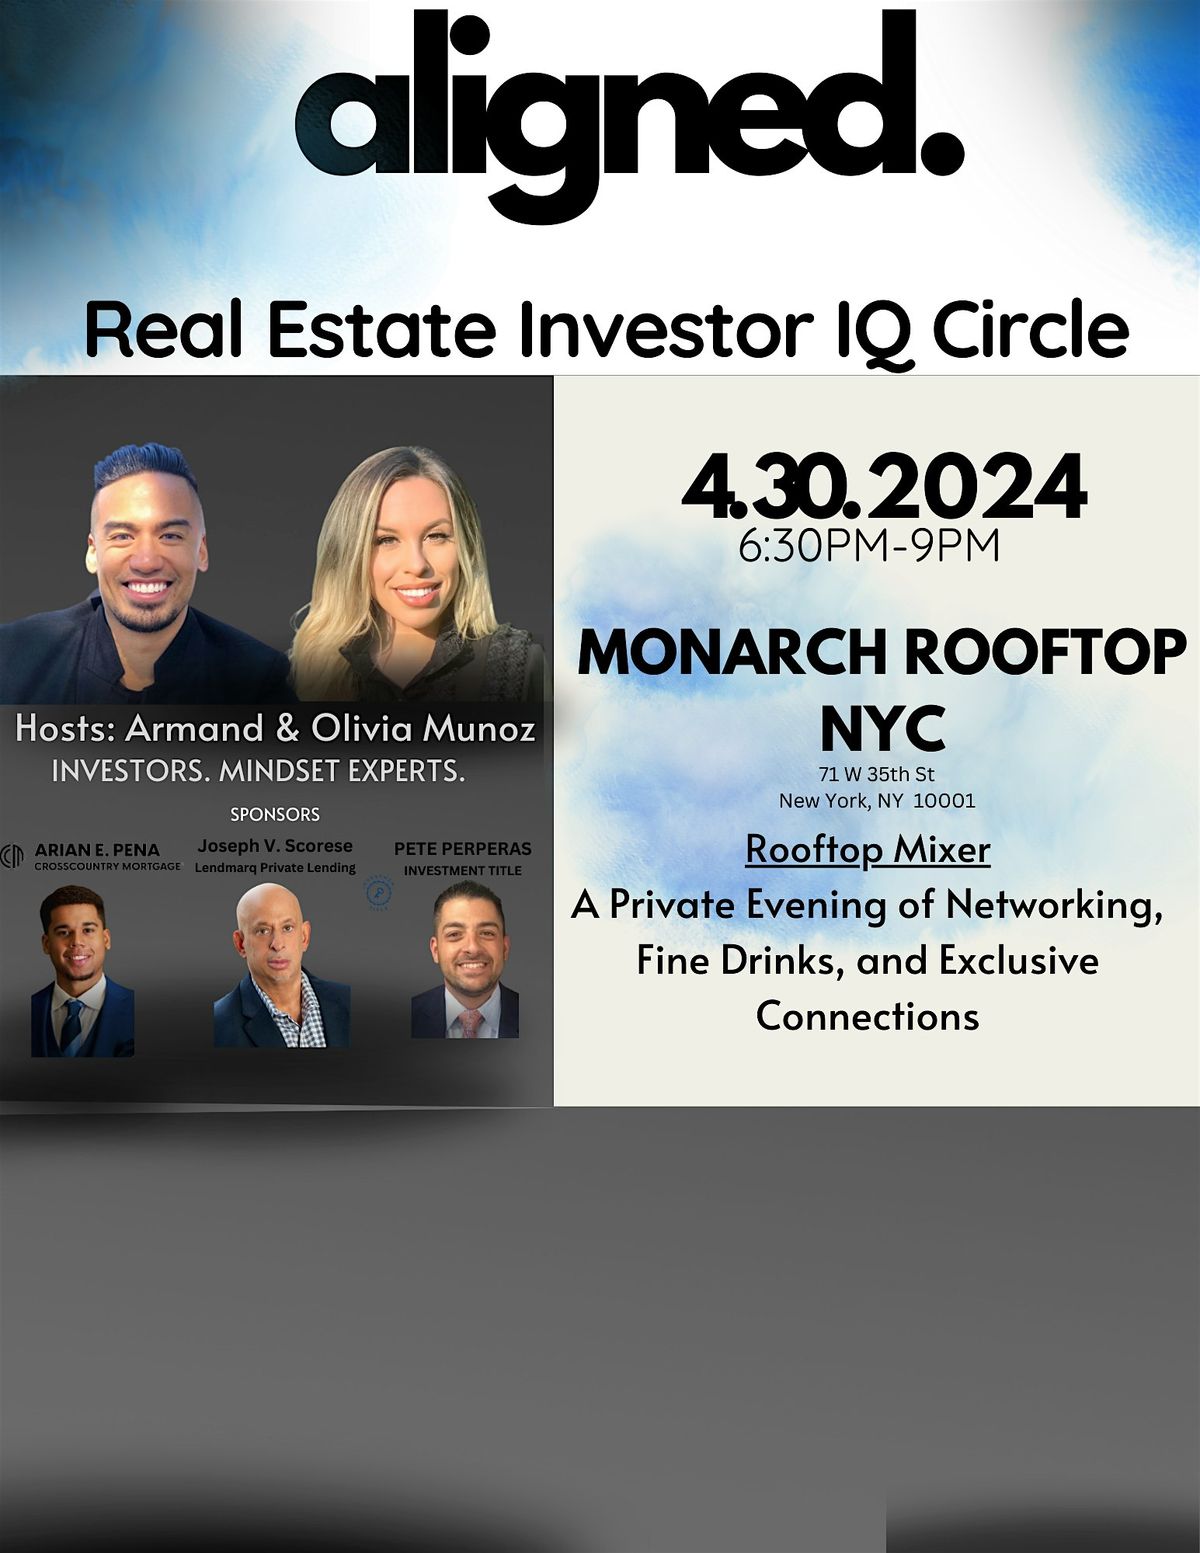 ALIGNED Real Estate Investors NYC Rooftop Mixer Networking Exclusive Meetup